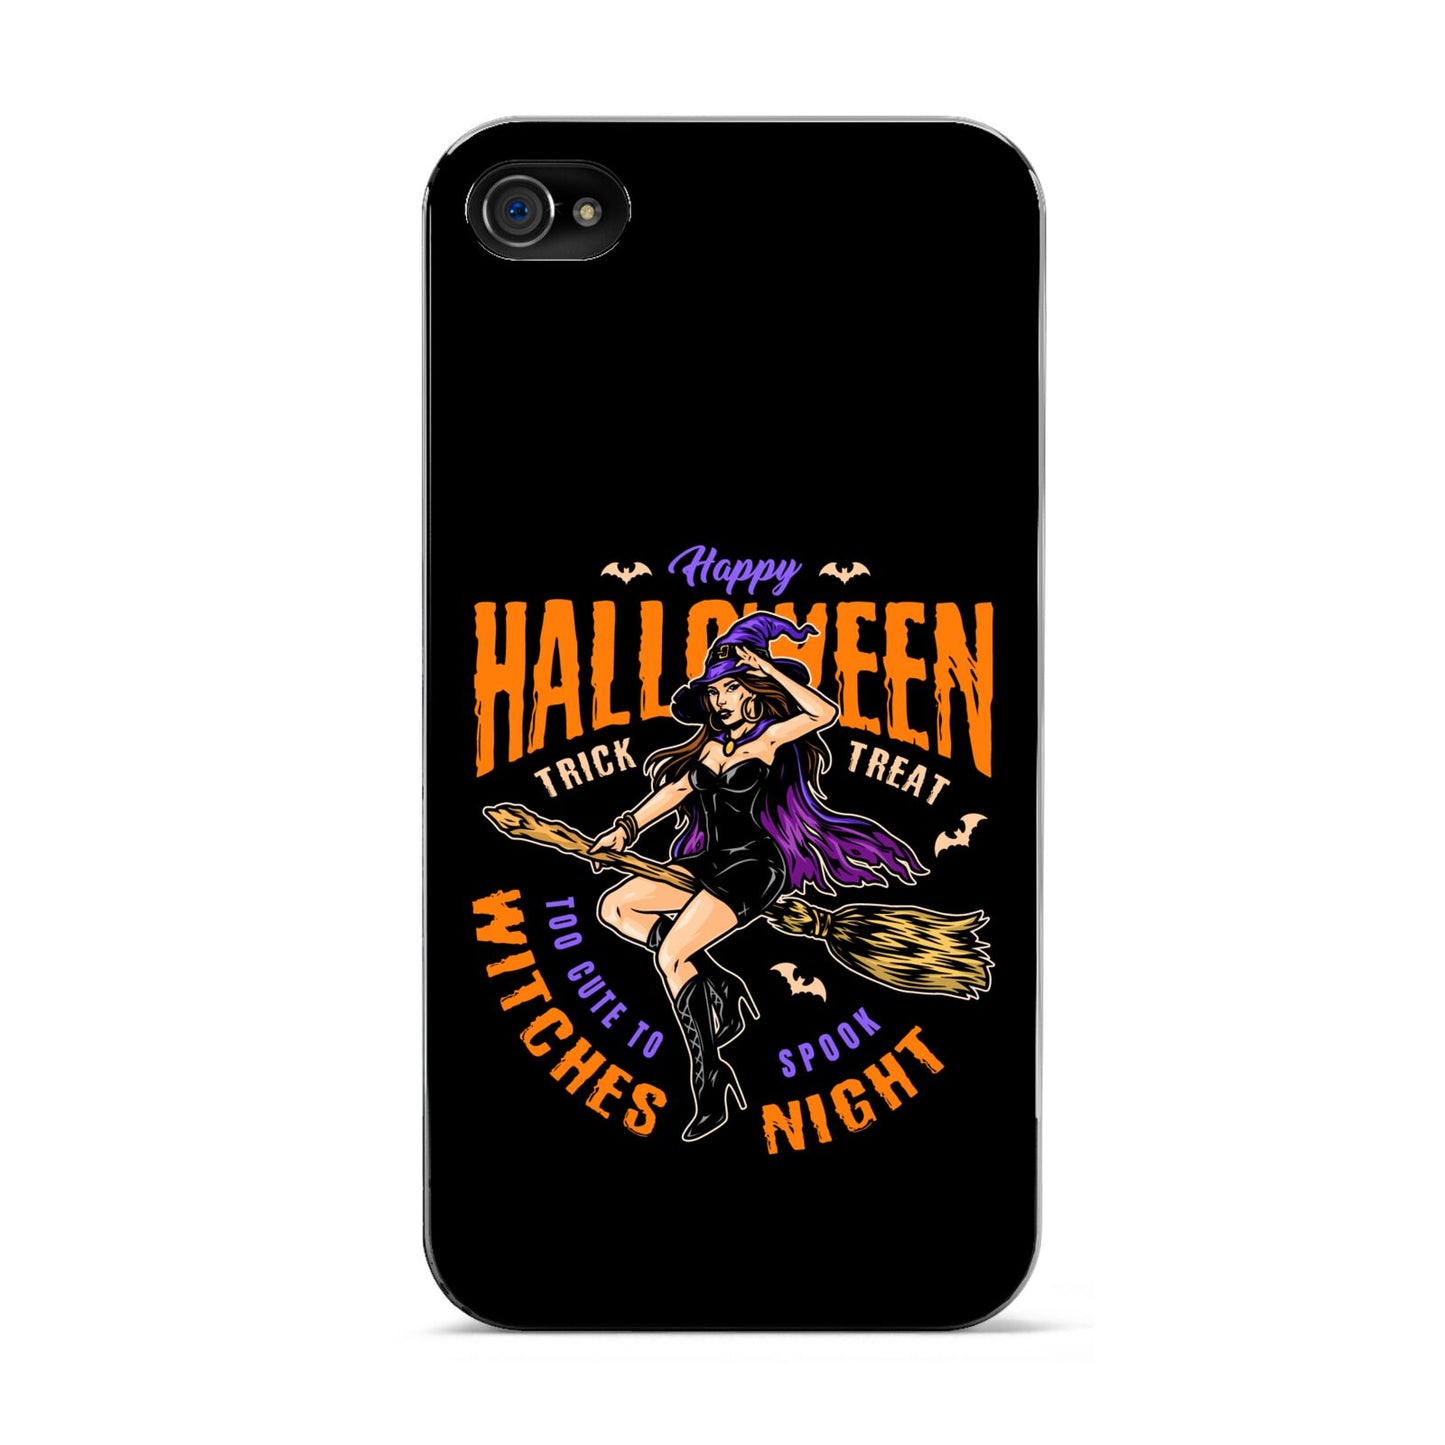 Witches Night Apple iPhone 4s Case